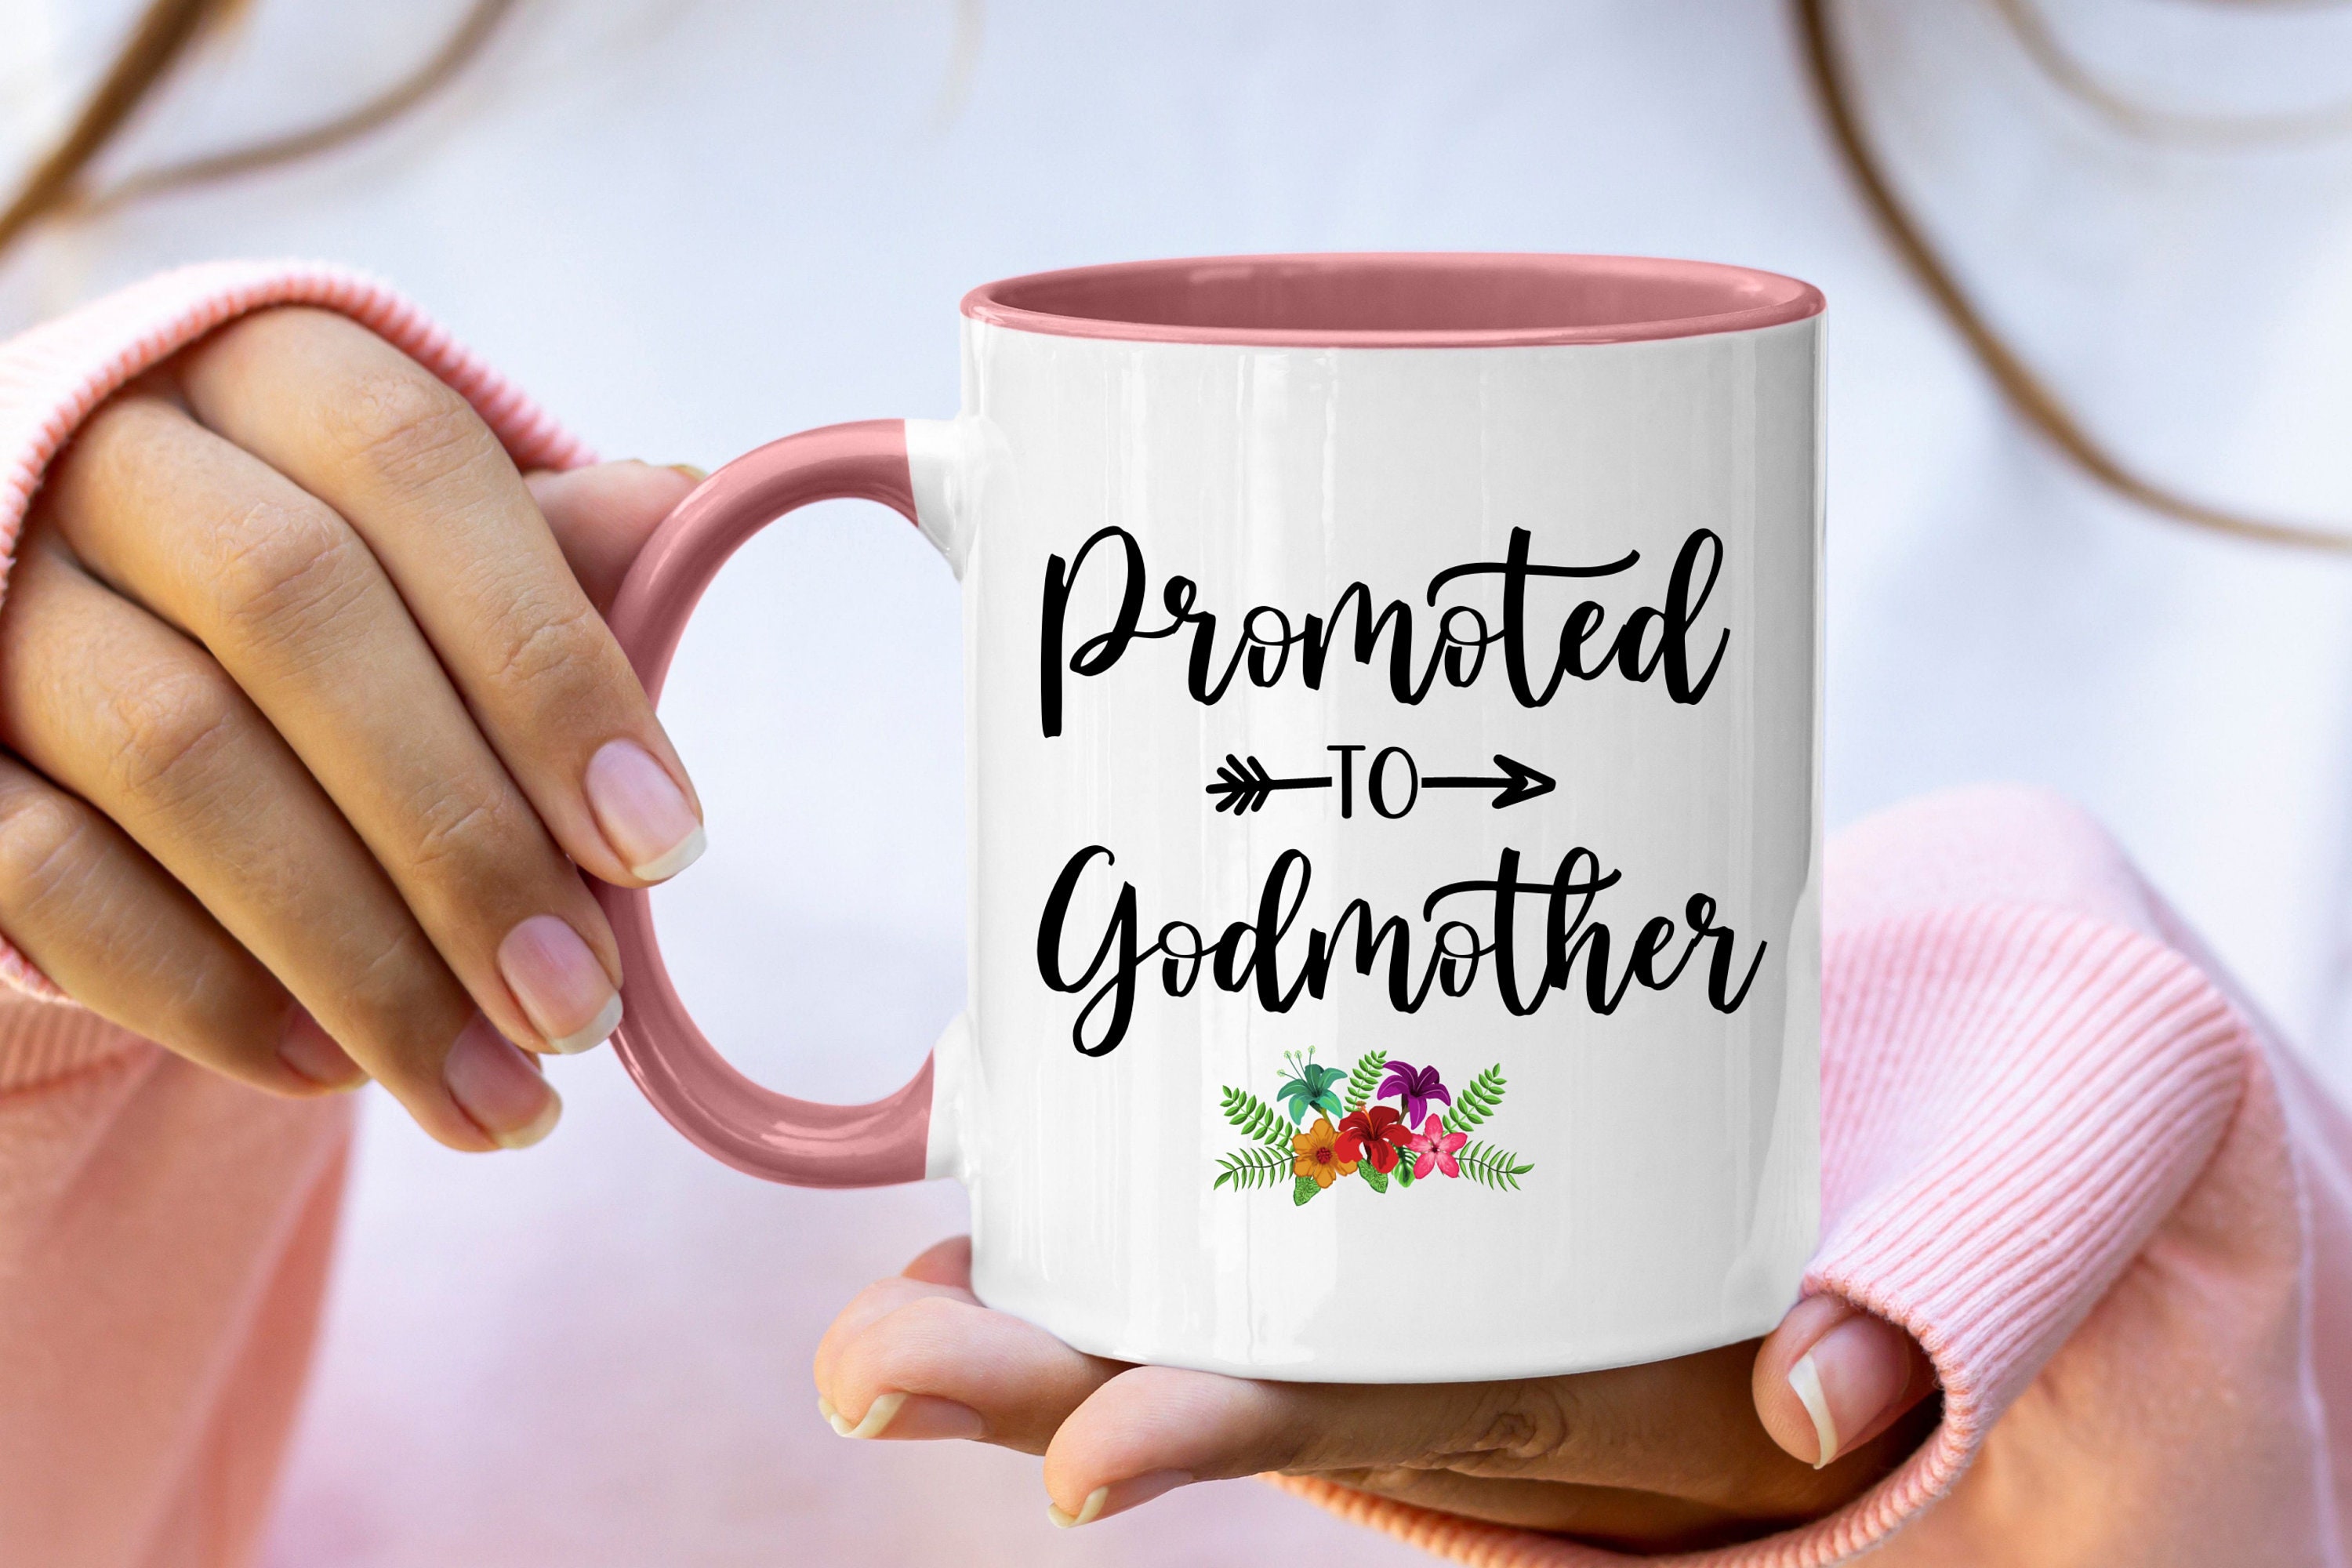 Christmas Baby Pregnancy Announcement Gifts for Godmother Friends Best Friends Get Promoted to Godmother Travel Tumbler 20 Oz Stainless Steel Insulated Tumbler with Lids Rose Gold Godmother Gifts 